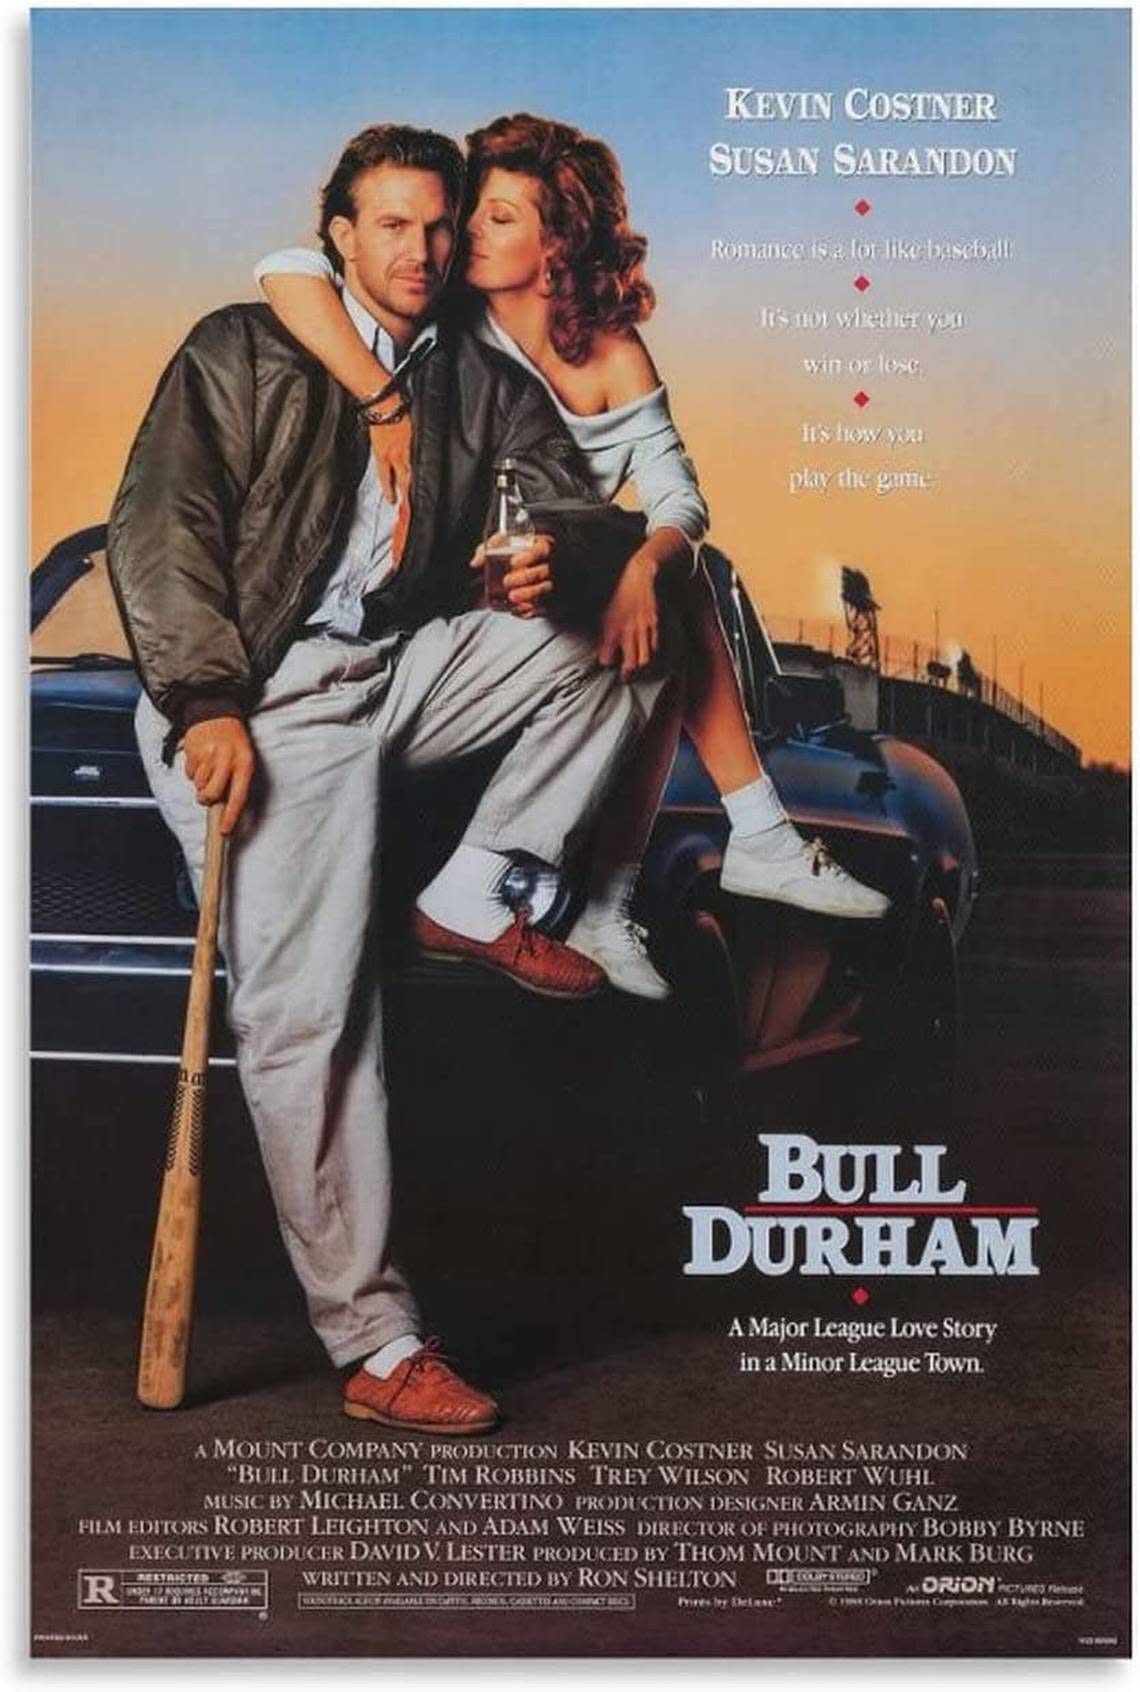 Bull Durham was released in 1988.